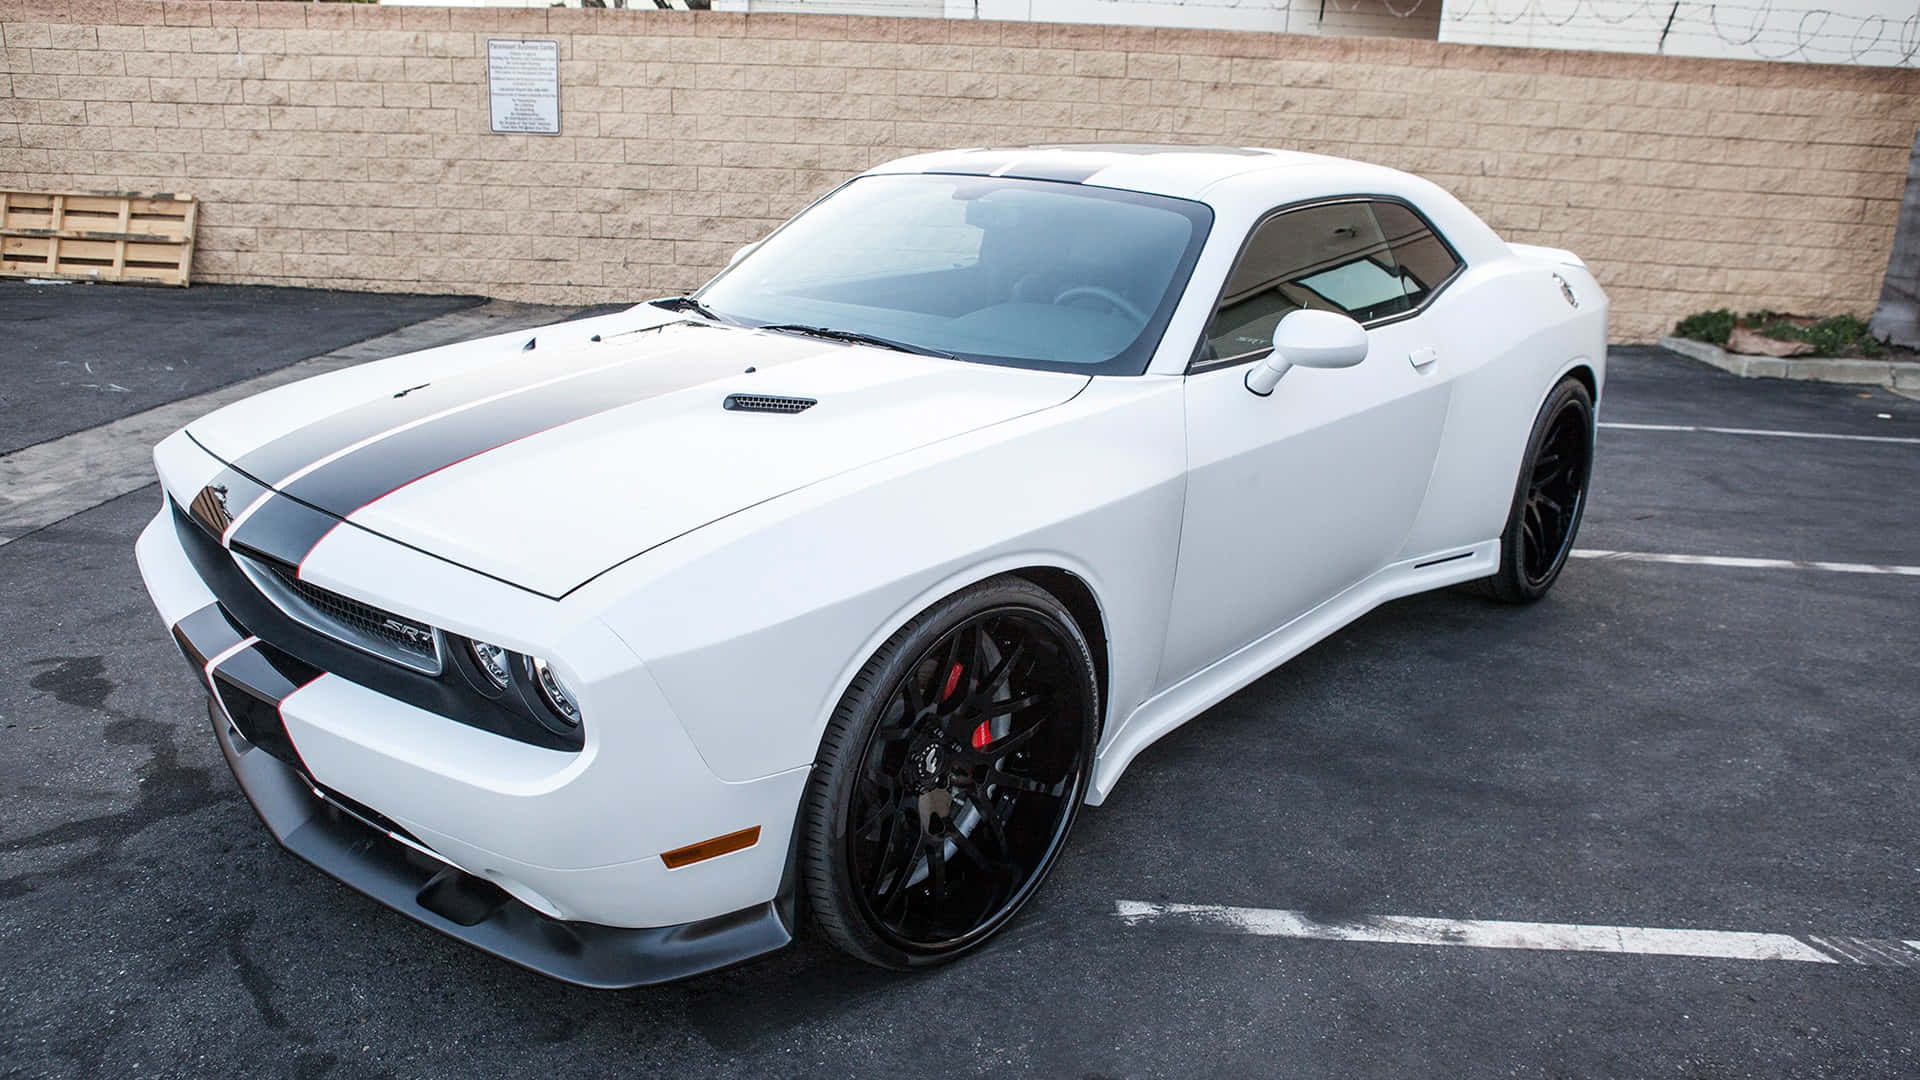 Feel The Ultimate Power Of The Dodge Challenger Hellcat!